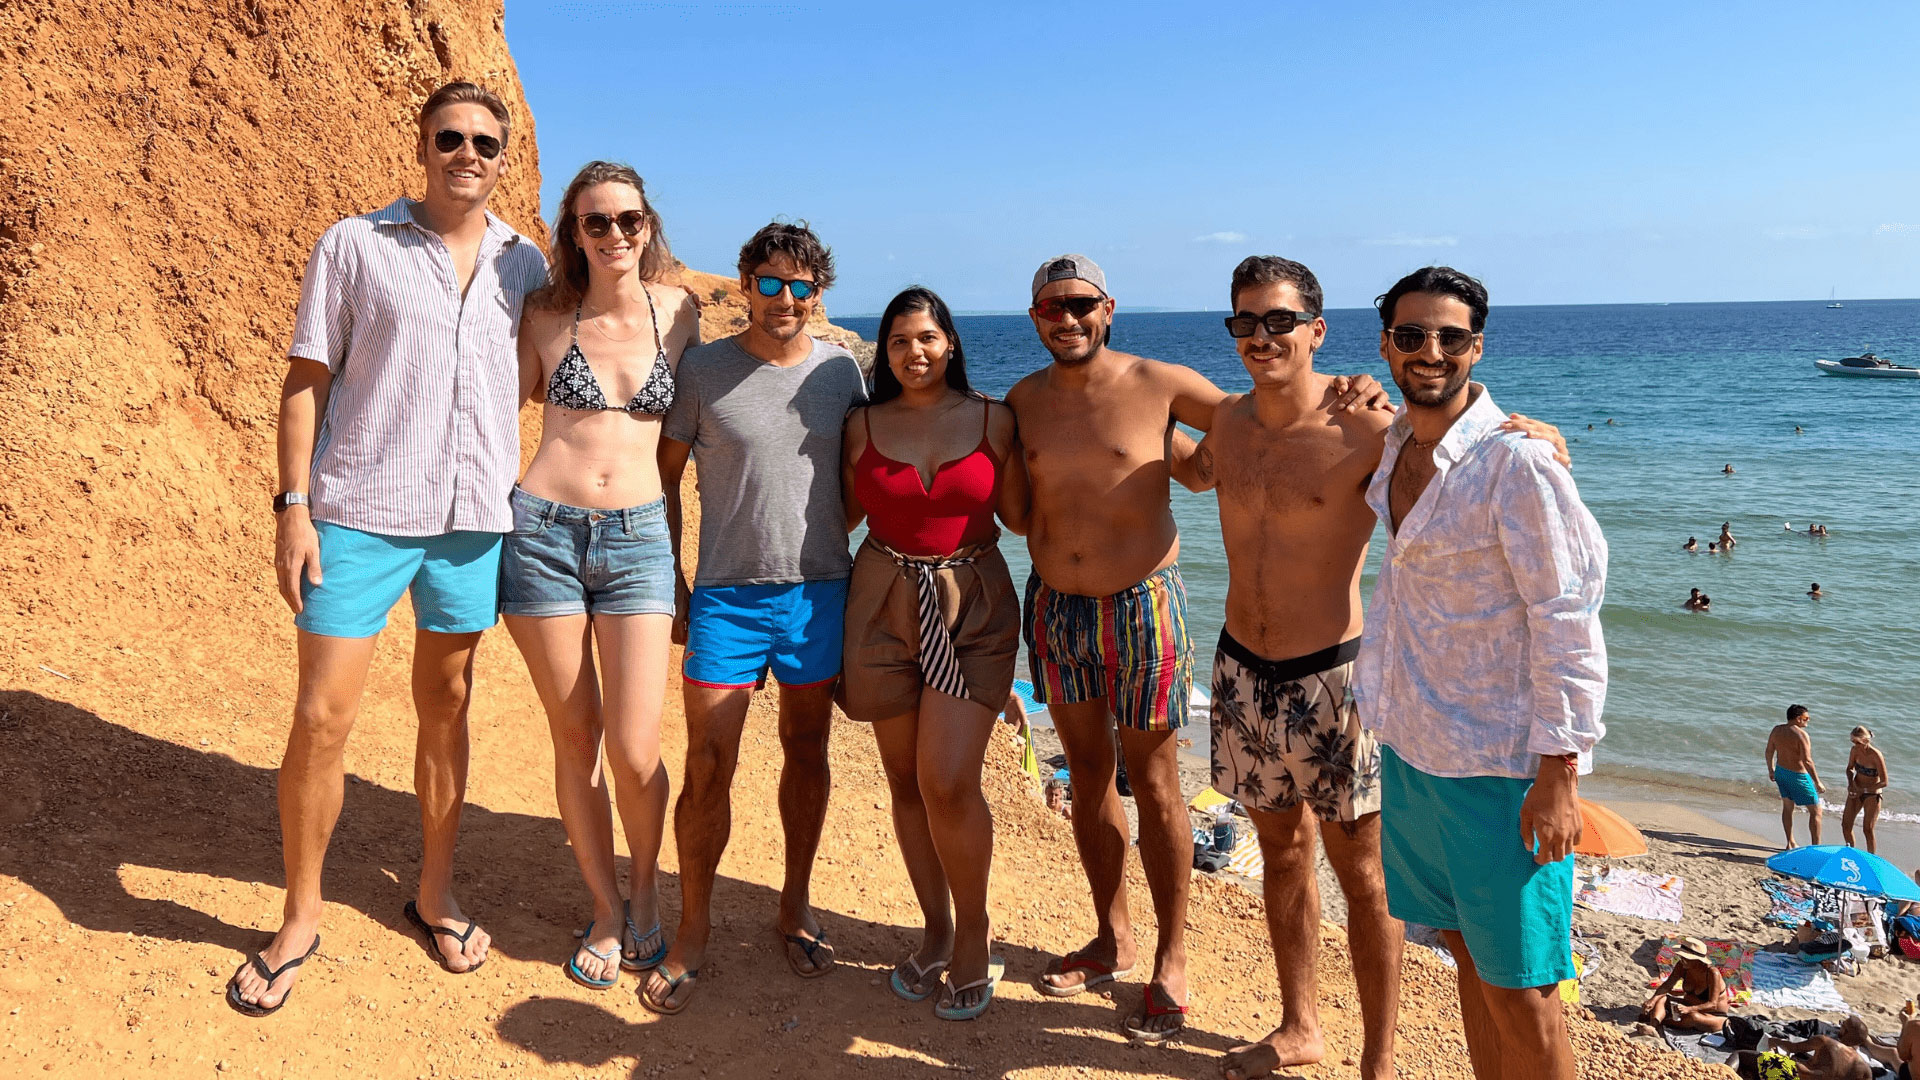 Team Building By The Sea: A Summer at NPAW's Ibiza House